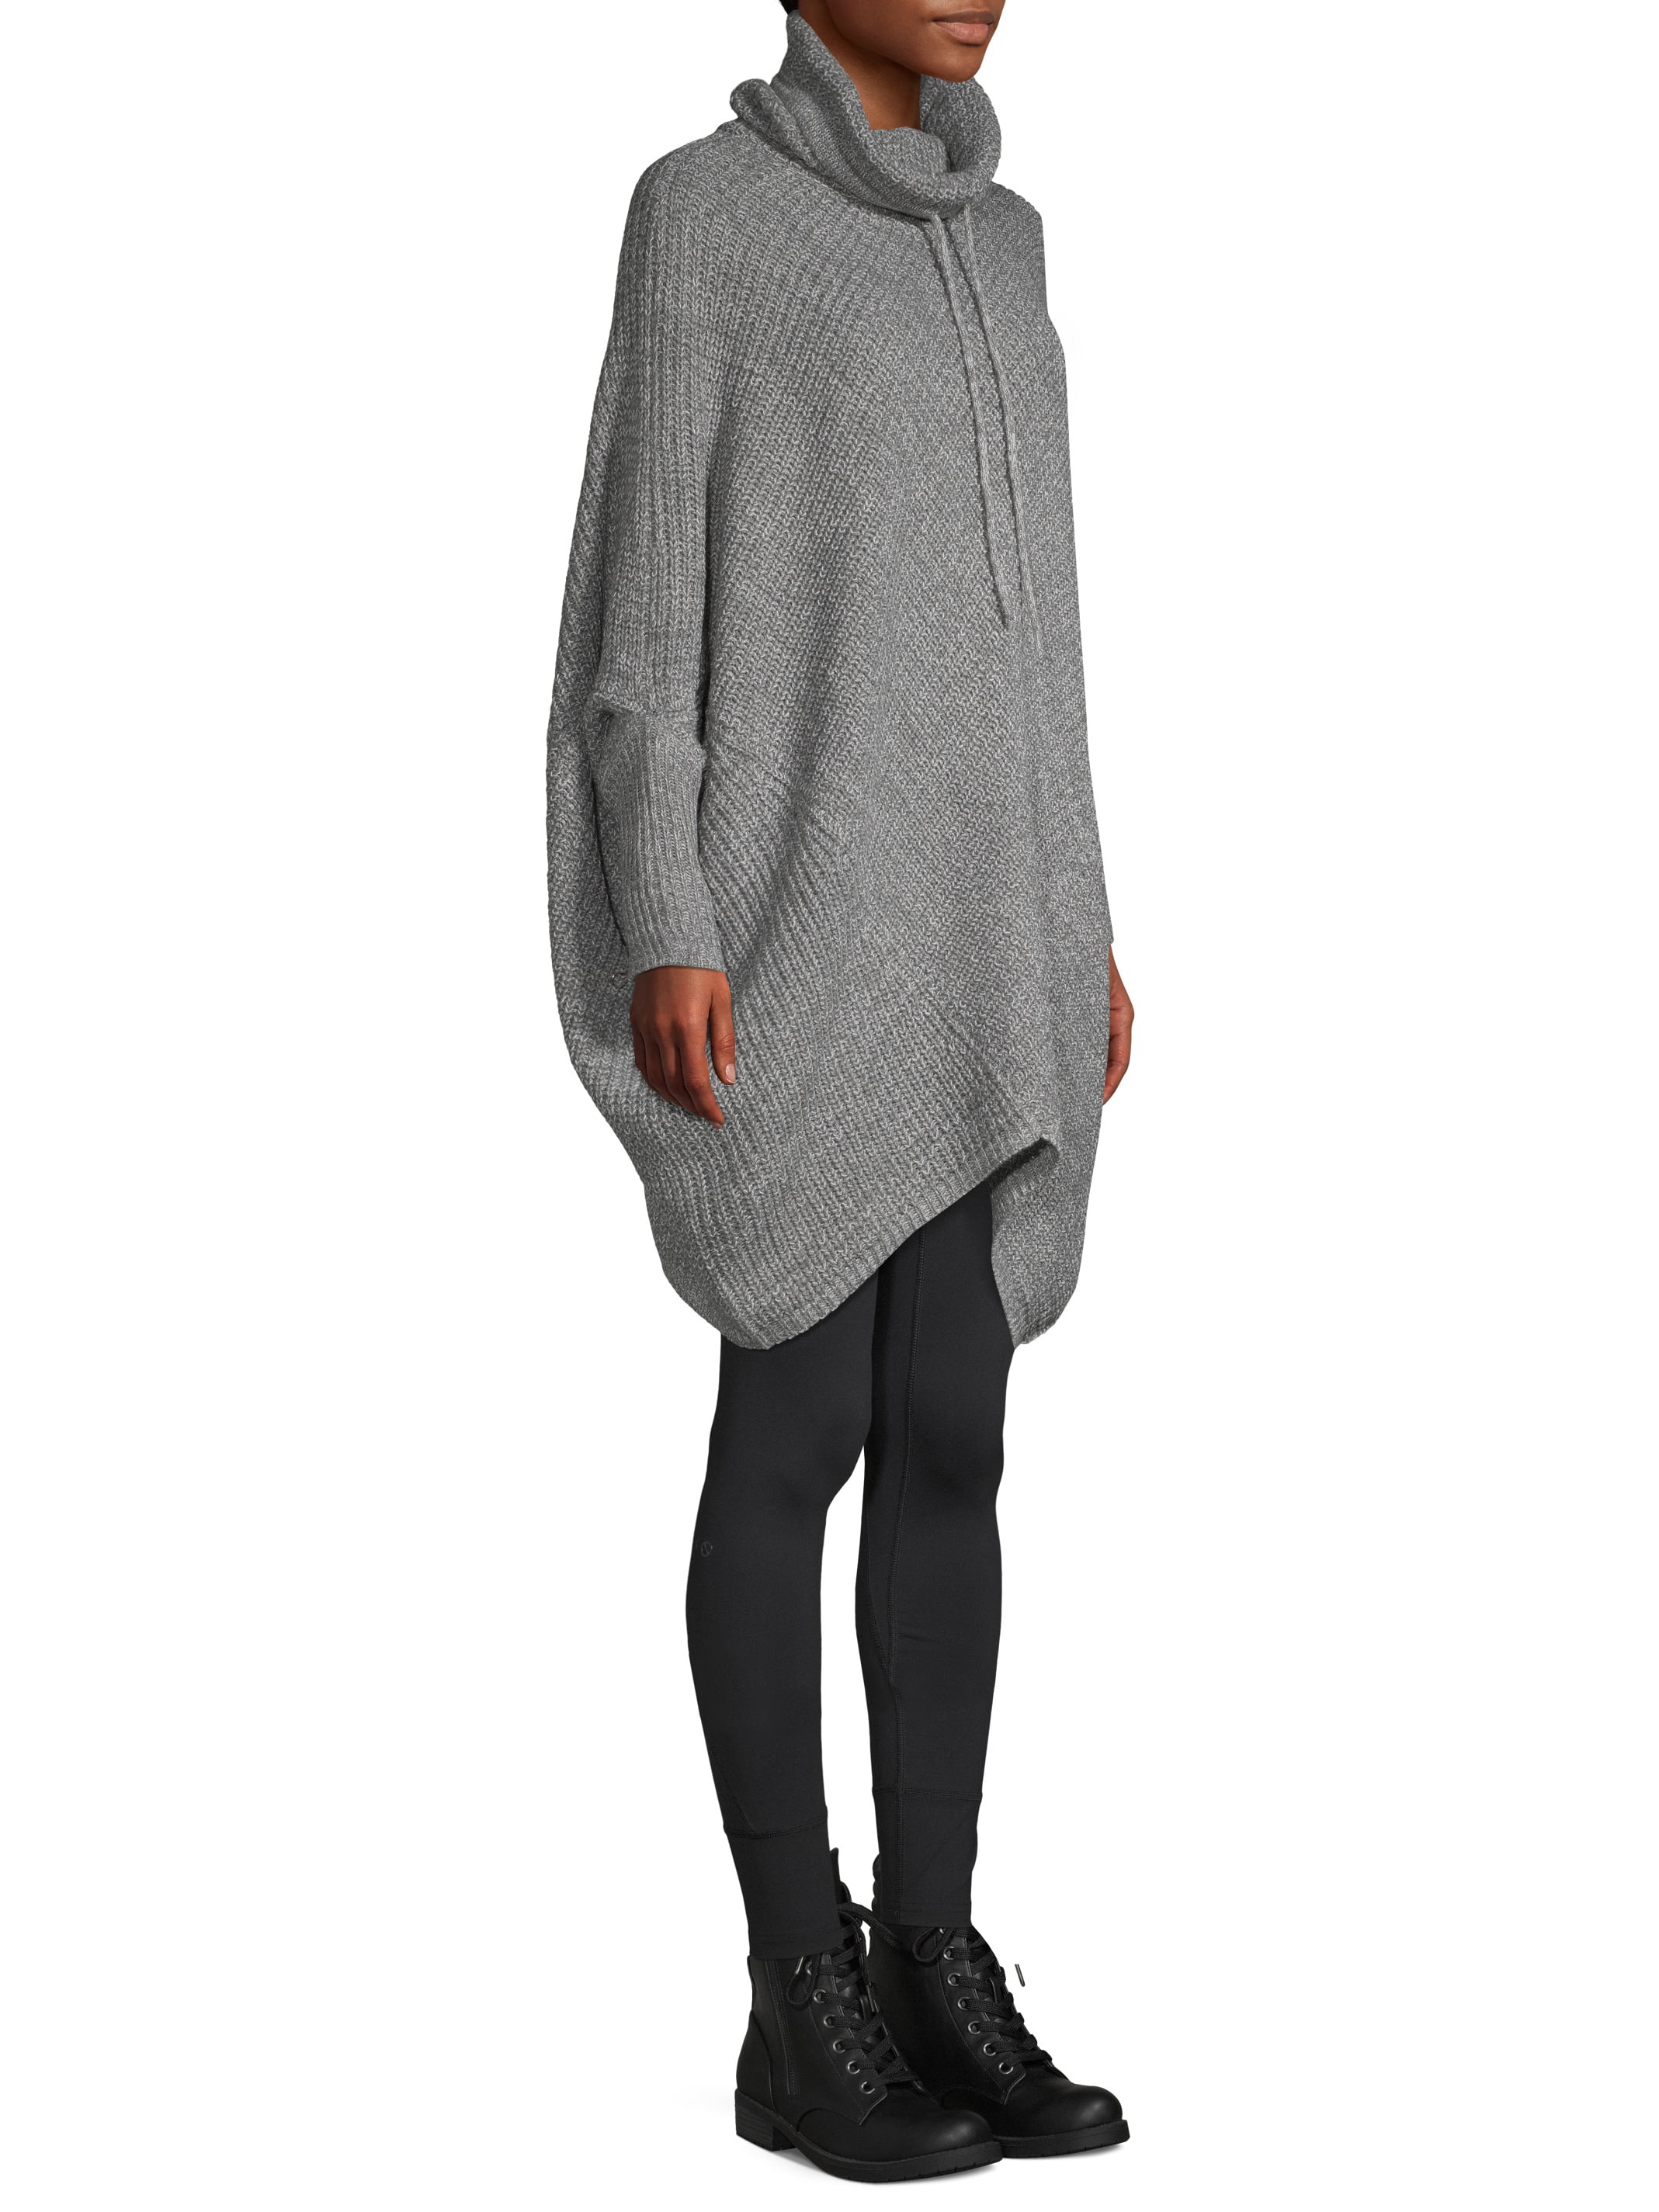 poncho sweater with sleeves